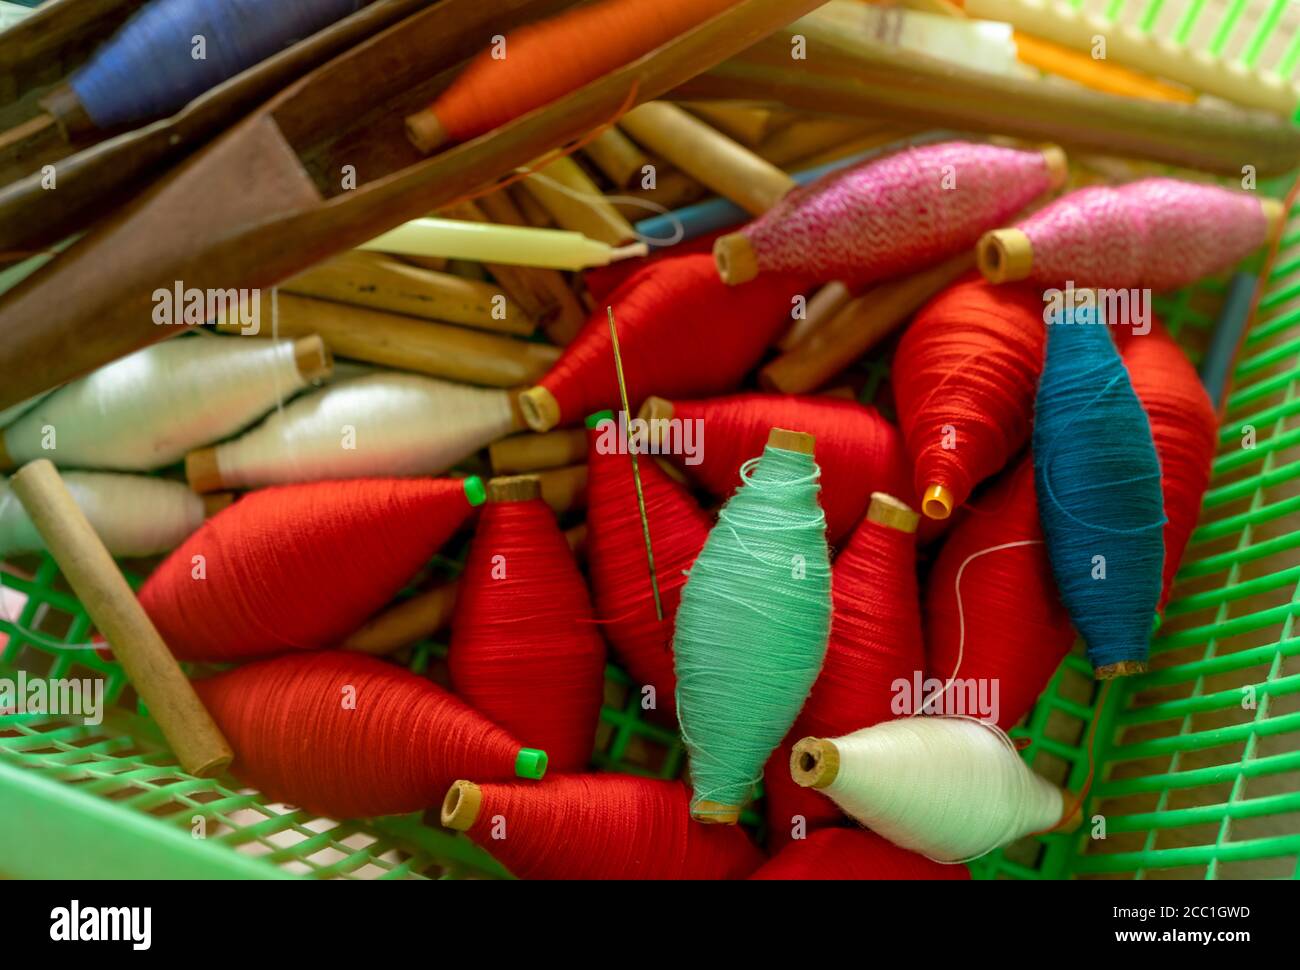 Top view colorful yarns on spool and empty wooden spools in plastic basket. Yarns in weaving shuttle tool. Textile fabric weave tools. Equipment Stock Photo